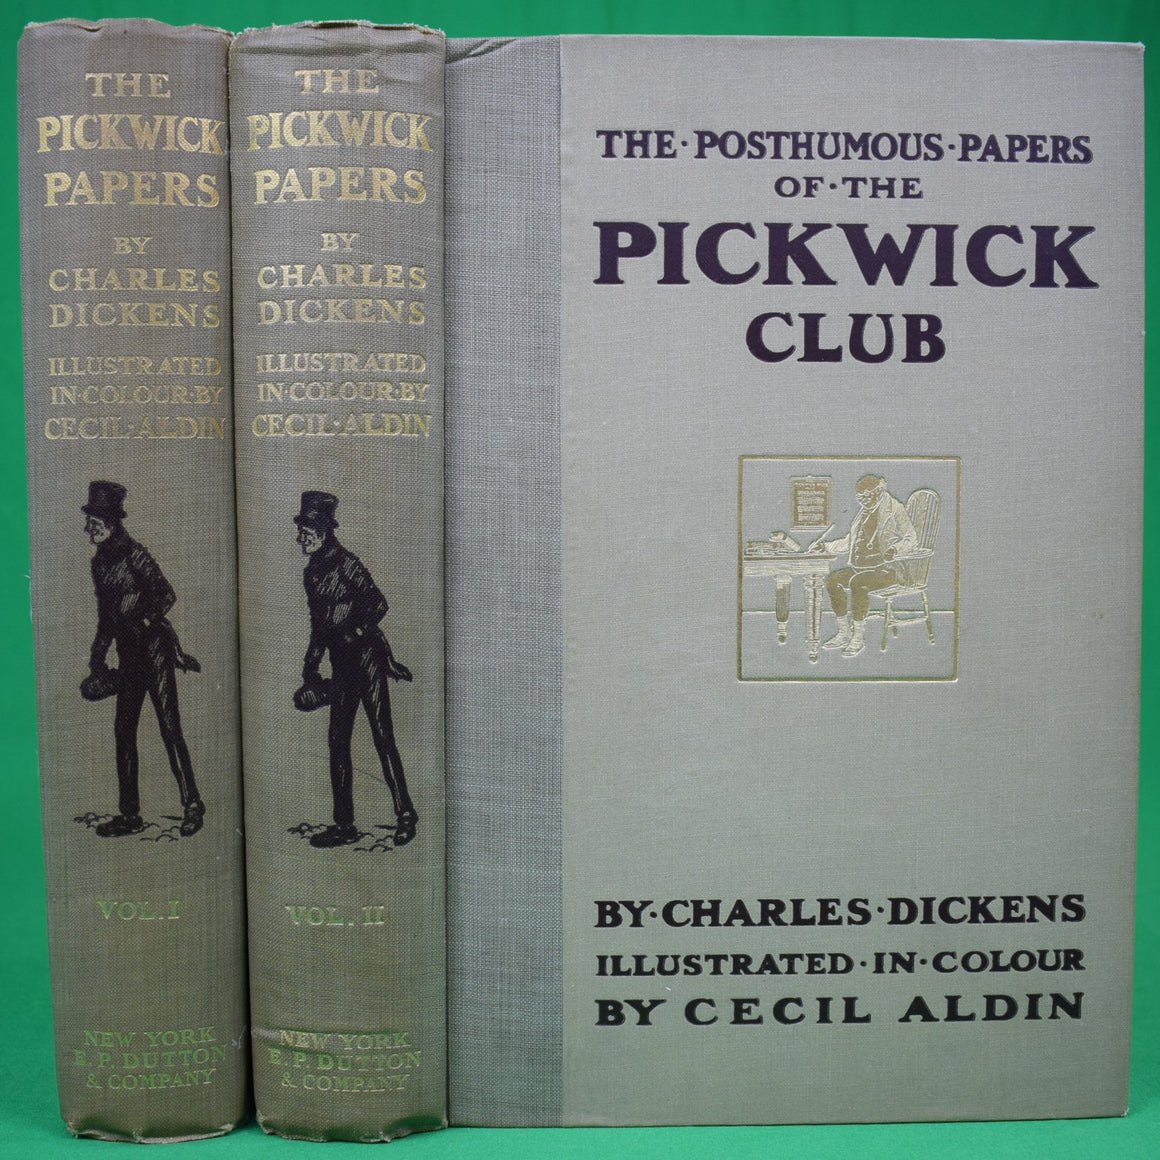 "The-Posthumous-Papers Of-The Pickwick Club Vols. I & II" 1910 DICKENS, Charles